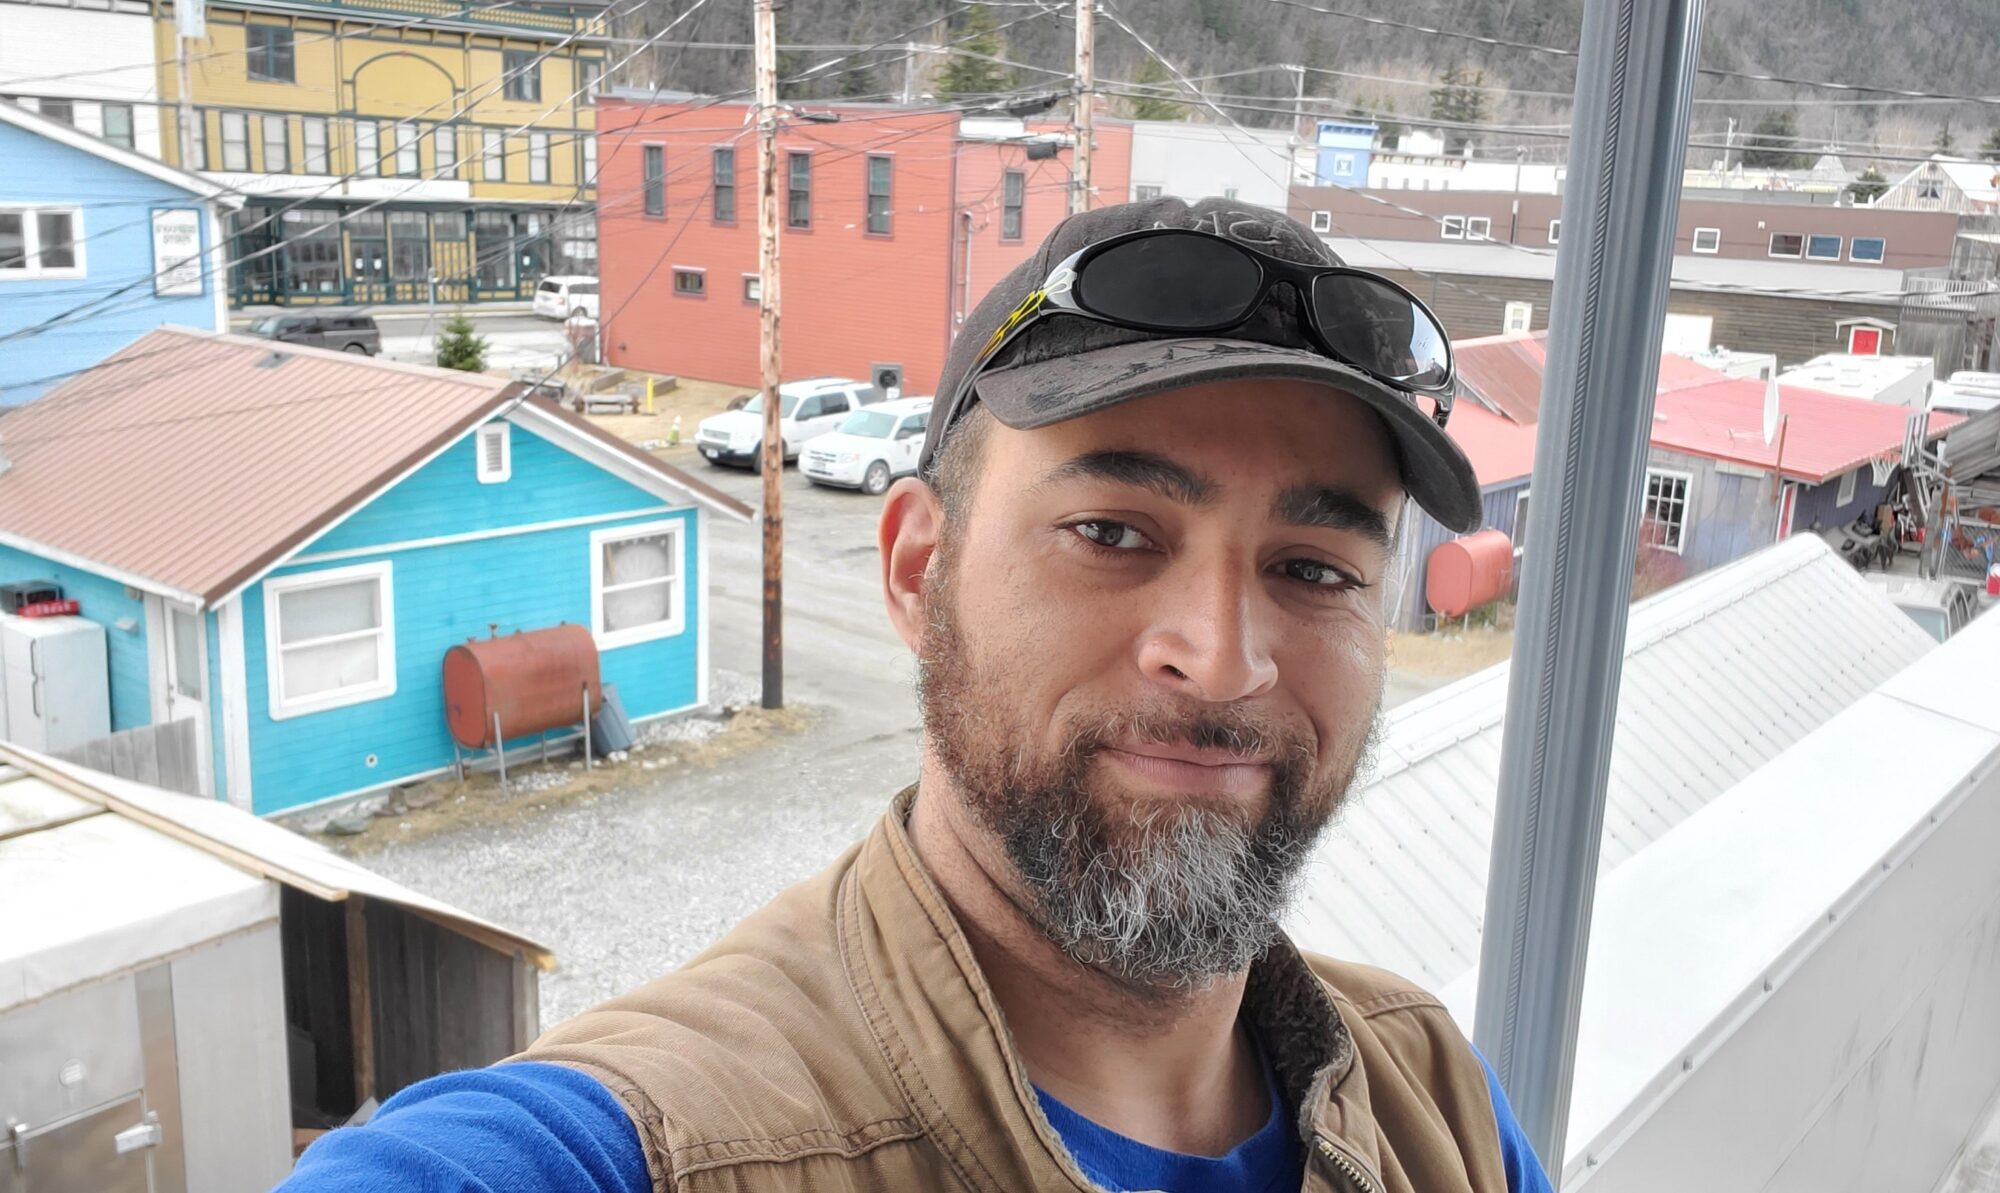 Skagway Assembly Candidate Profile: William Lockette